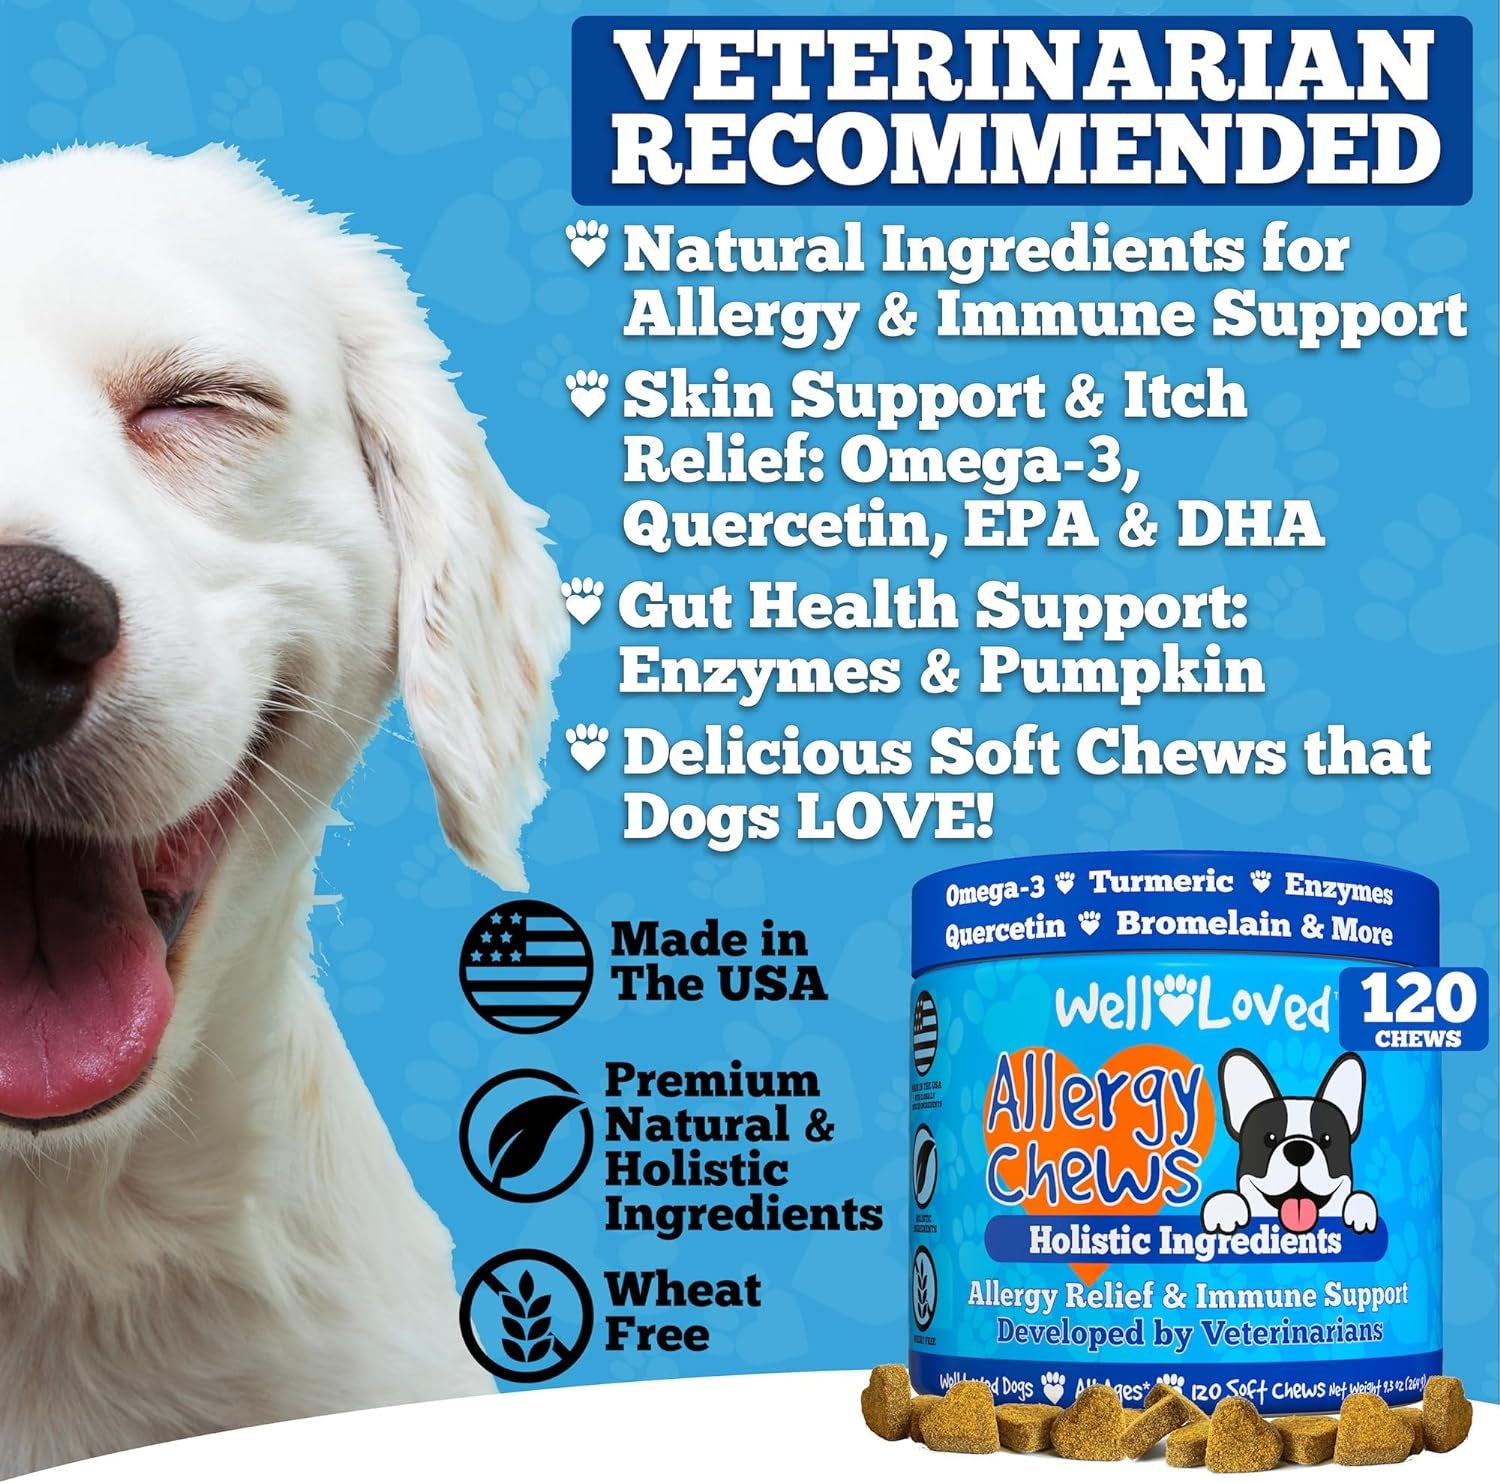 Well Loved Dog Allergy Chews - Dog Allergy Relief, Made in USA, Vet Developed, Hot Spot Treatment for Dogs, Dog Itch Relief, anti Itch for Dogs, Dog Vitamins, Dog Skin Allergies Treatment, 120 Count